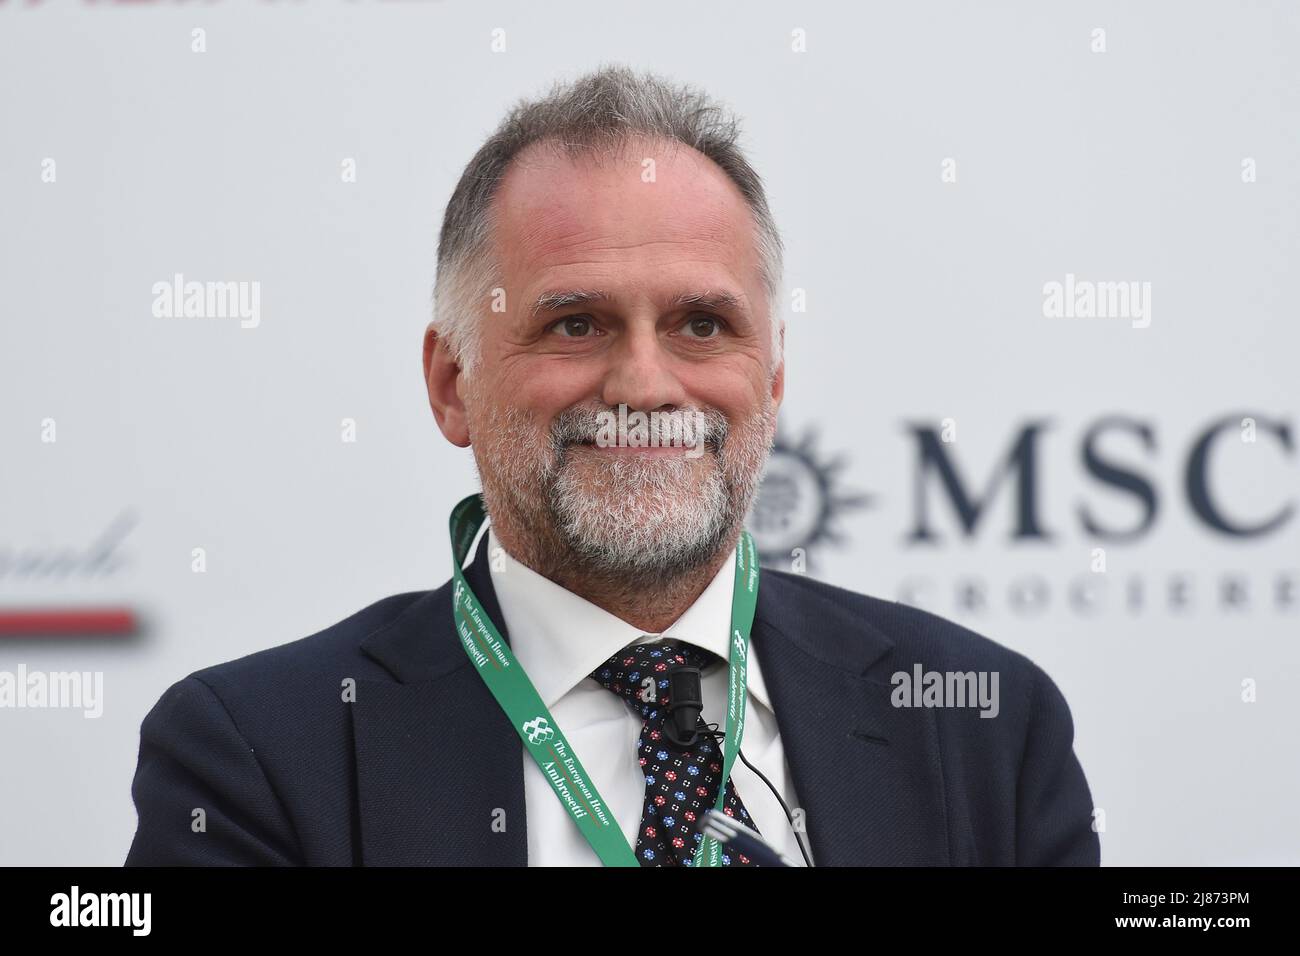 Sorrento, Italy. 13 May, 2022. Massimo Garavaglia Italian Minister of Tourism at the 1st edition of ”Verso Sud” organized by the European House - Ambrosetti in Sorrento, Naples Italy on 13 May 2022. Credit:Franco Romano/Alamy Live News Stock Photo